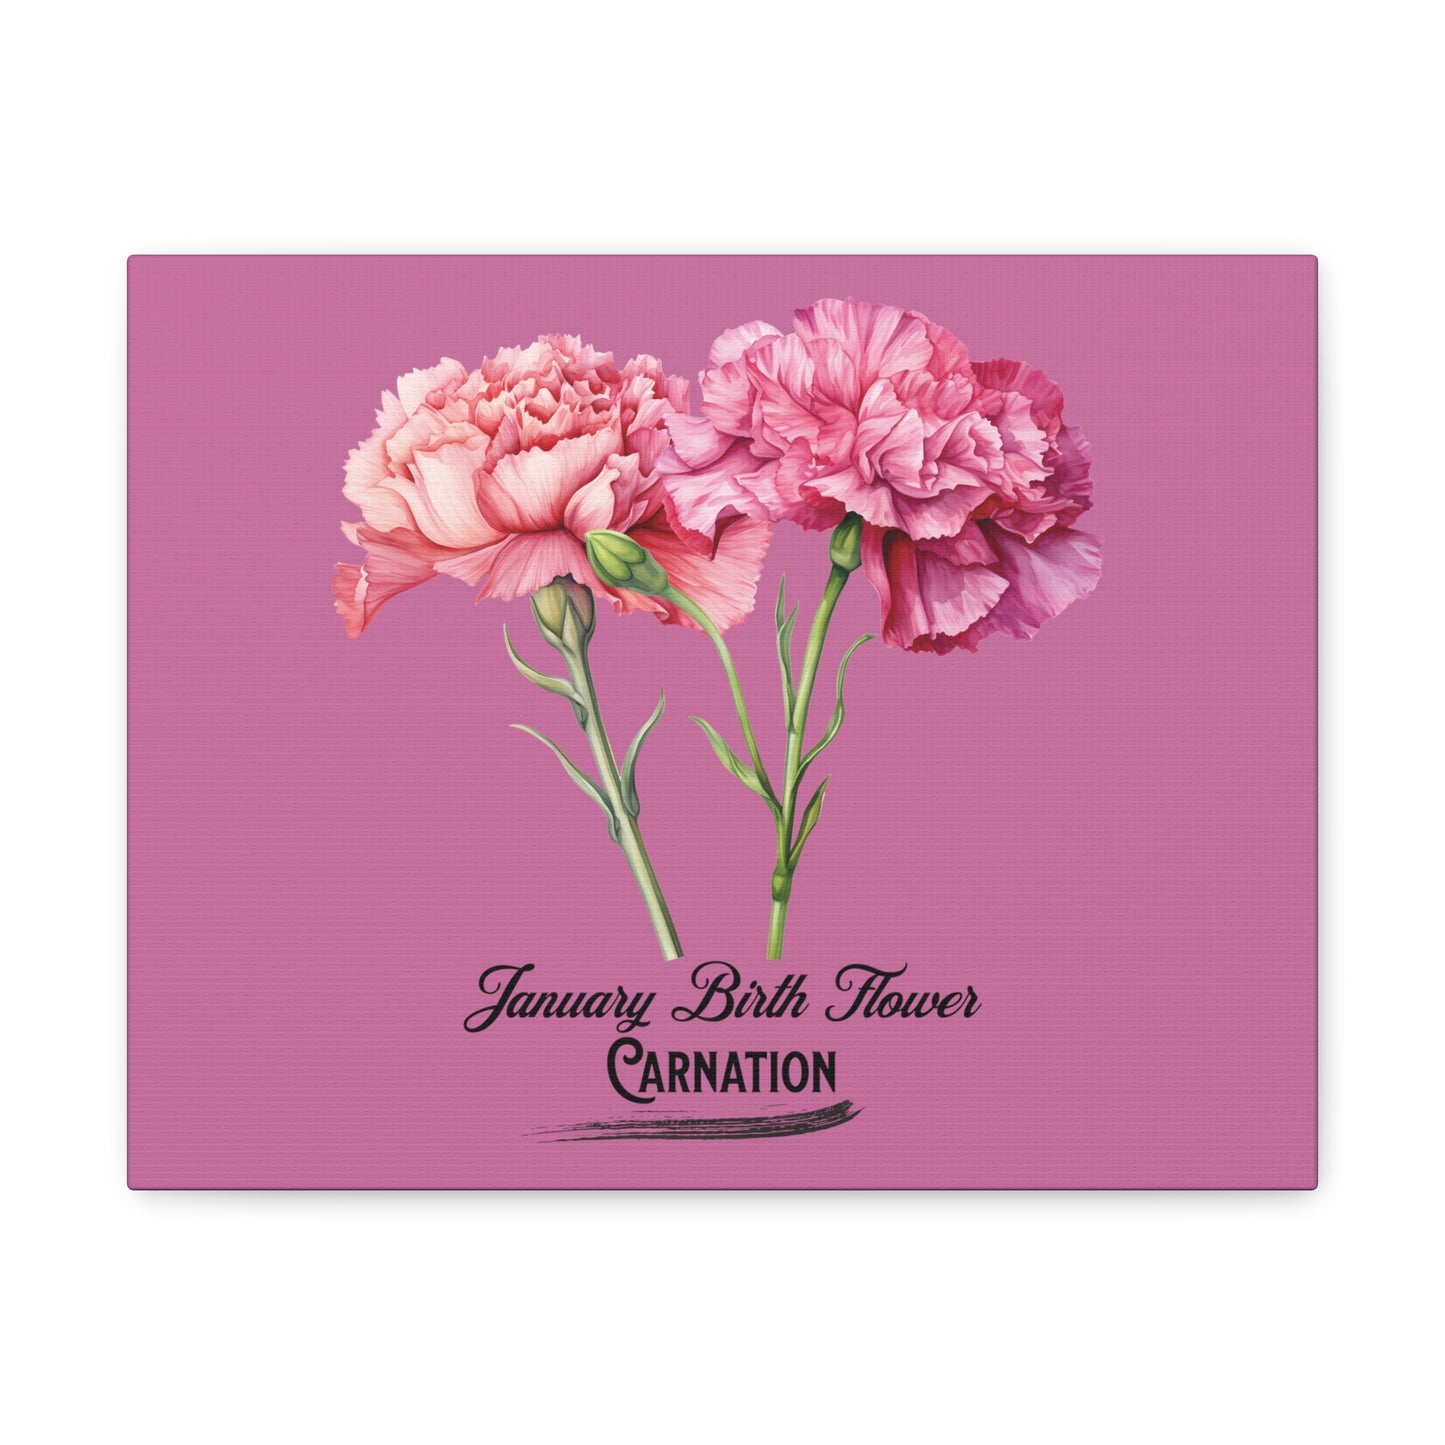 January Birth Flower (Carnation): Canvas Gallery Wraps